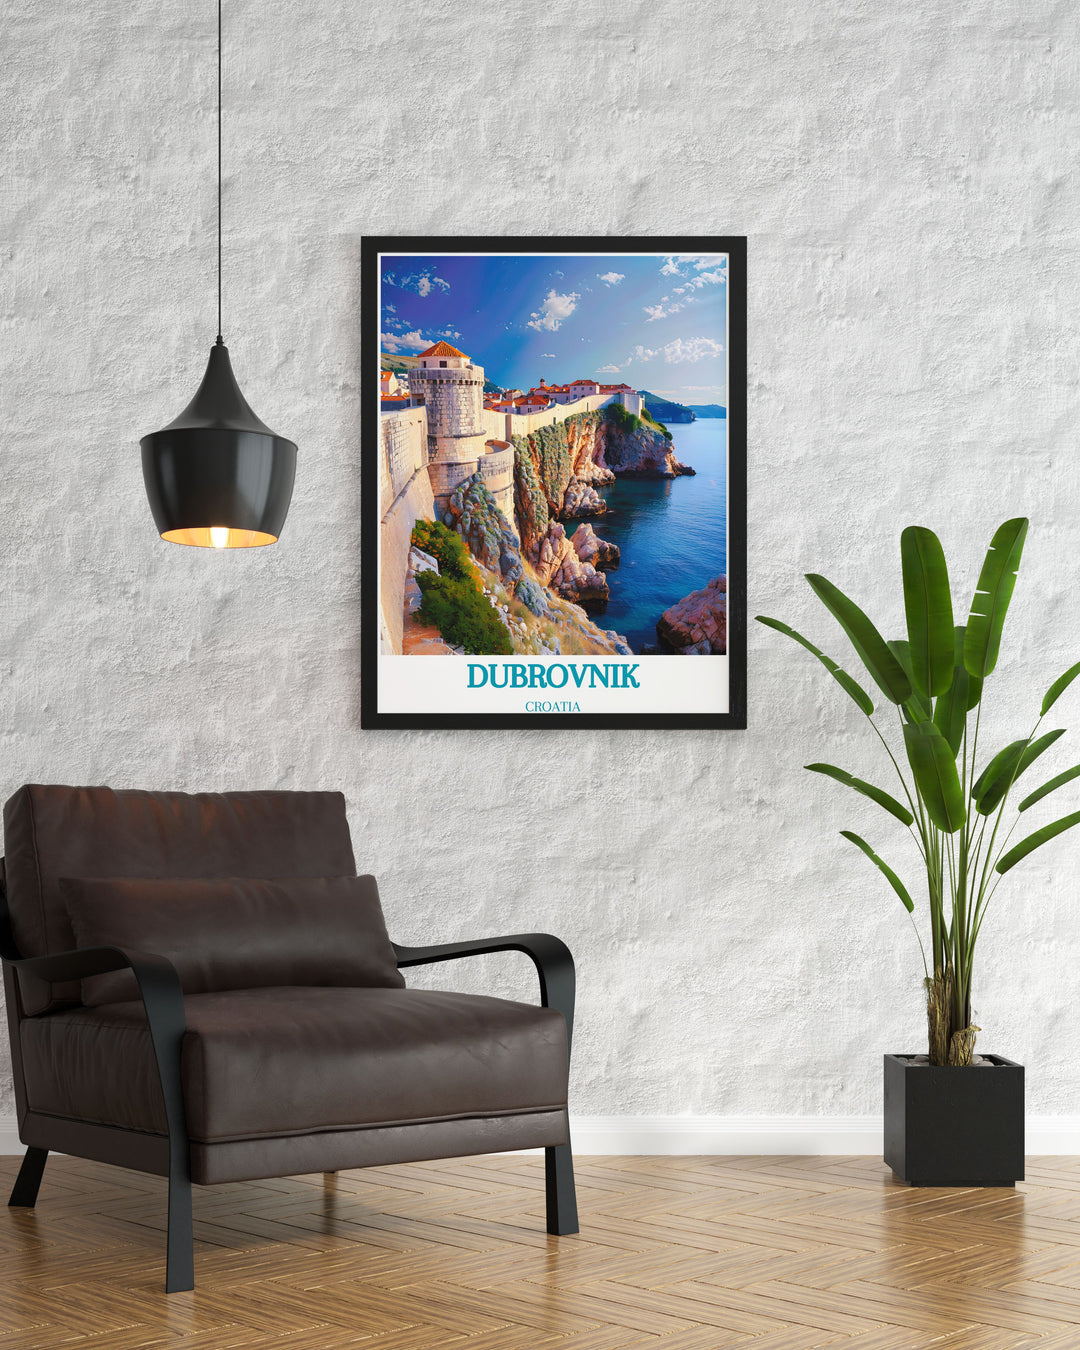 Framed art print showcasing the iconic landscapes of Dubrovnik, celebrating the beauty of Croatias renowned city walls.